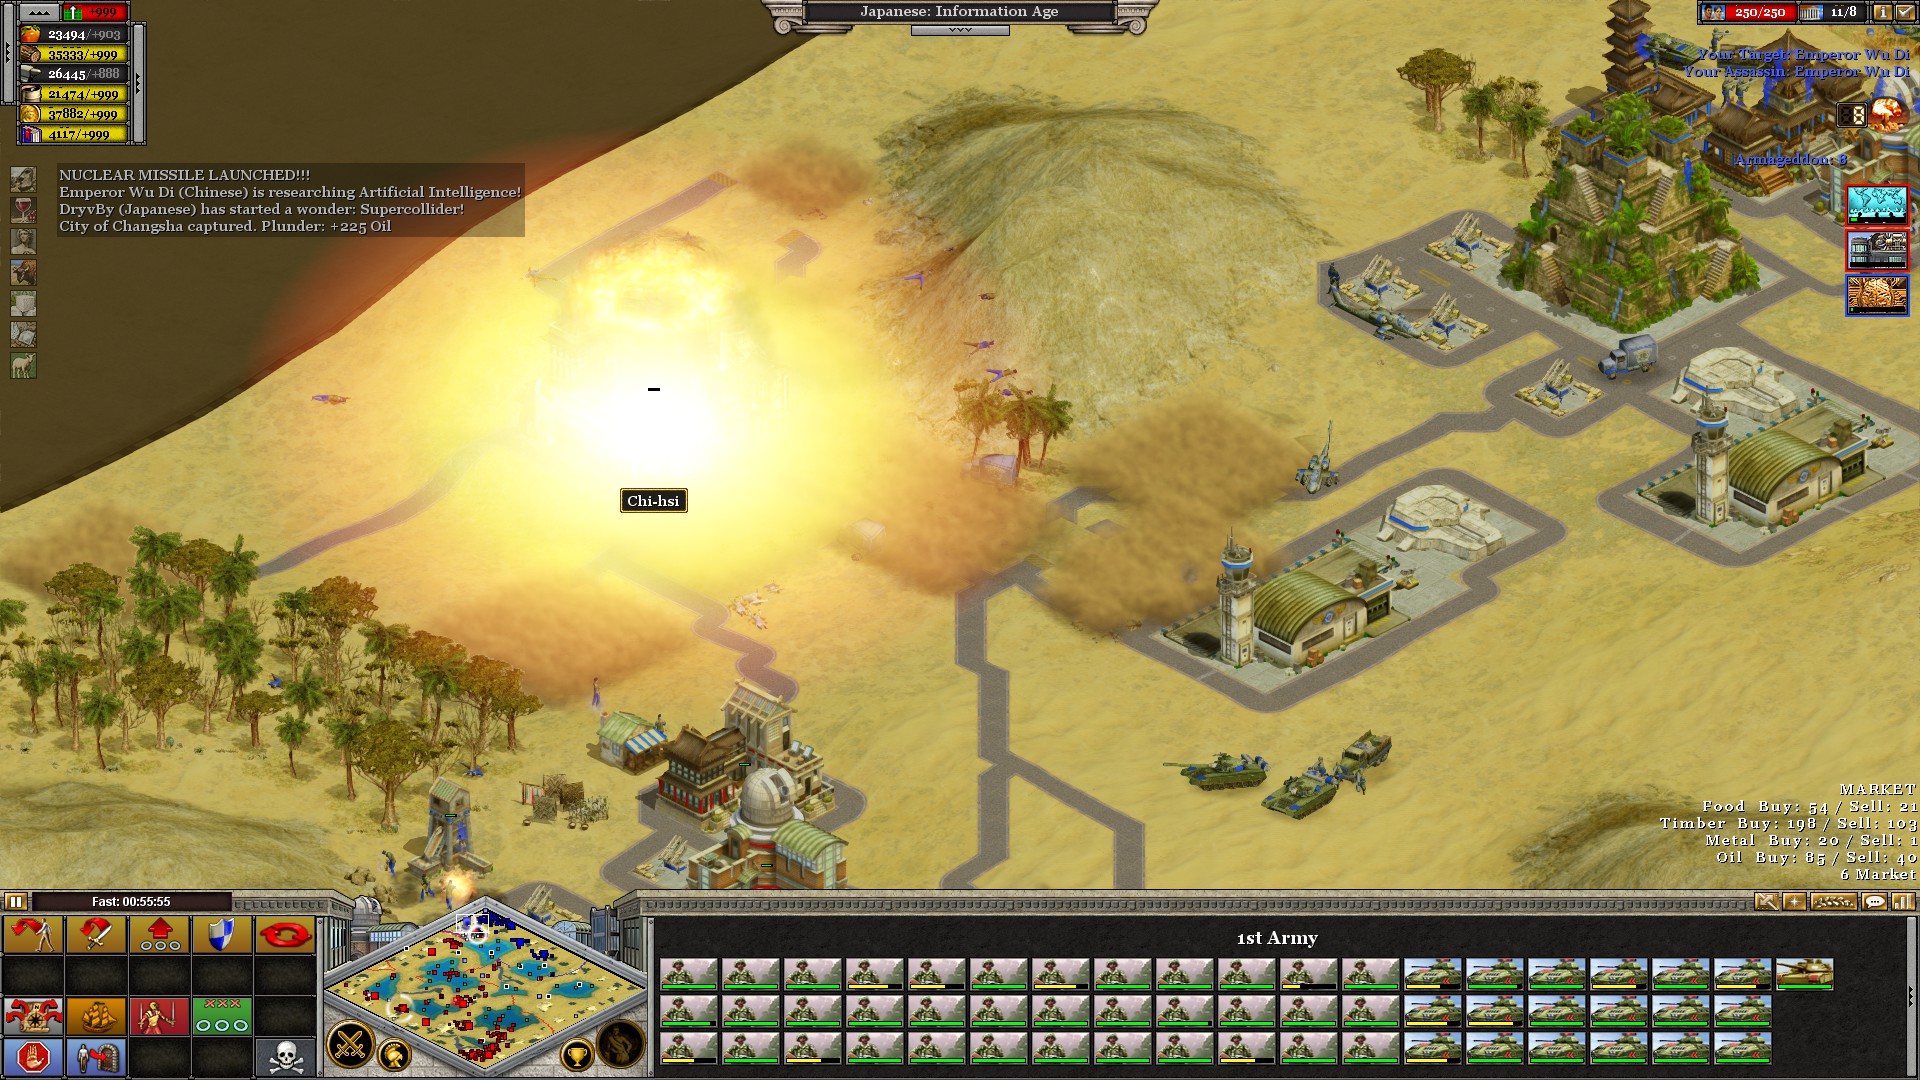 Rise of Nations: Thrones & Patriots